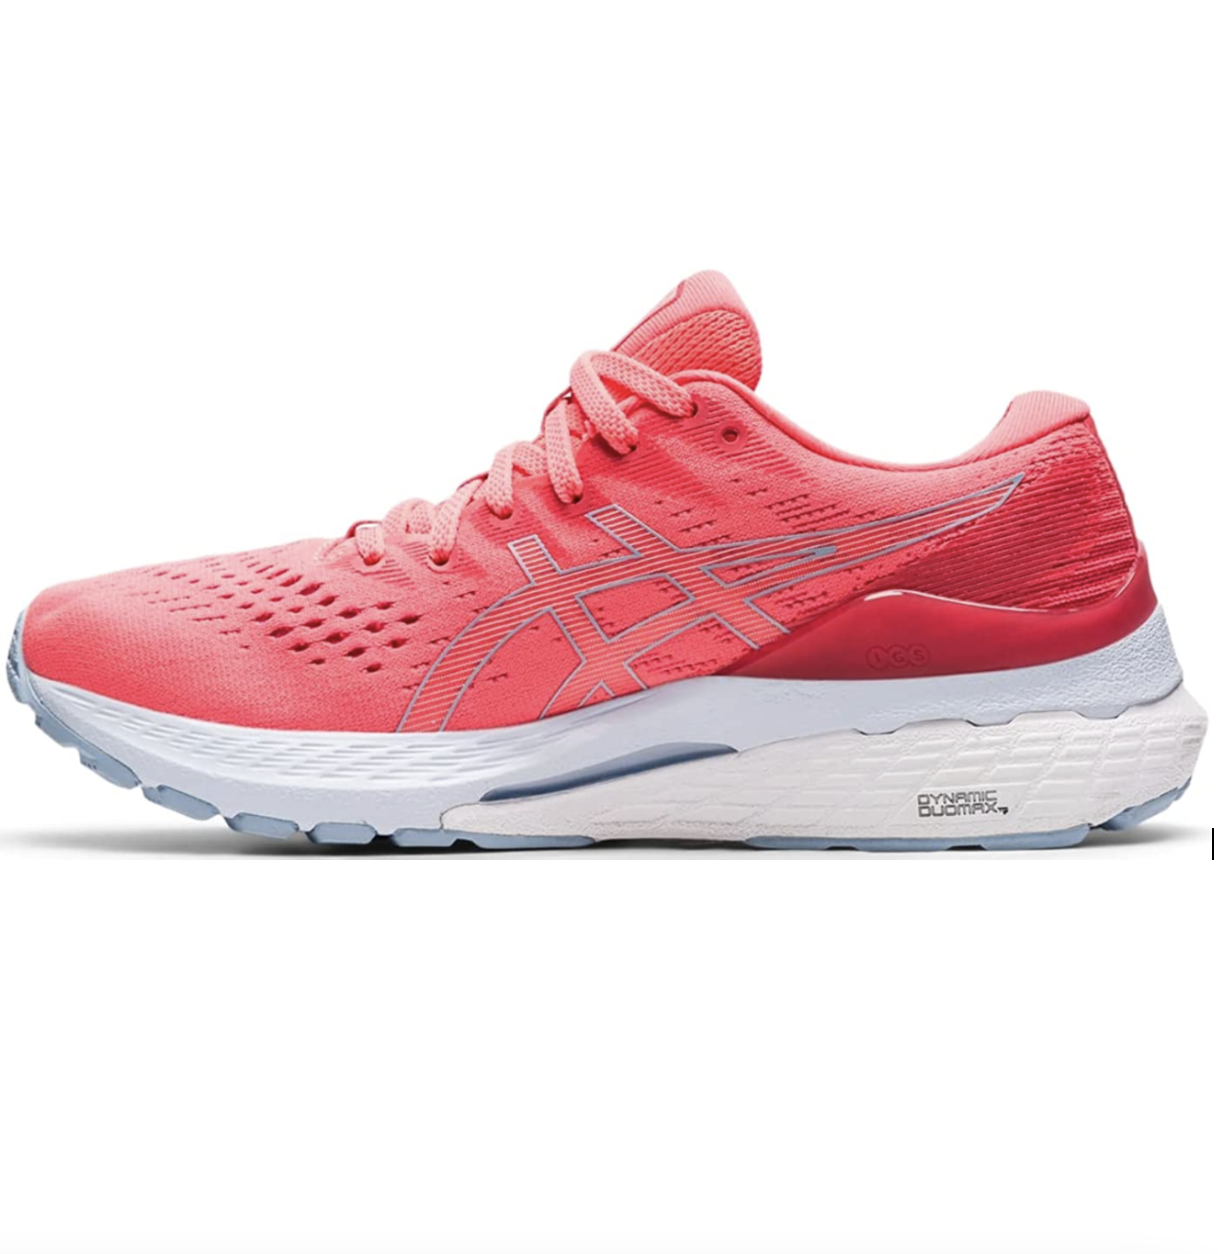 Best running shoes for gym and weight training | Solereview